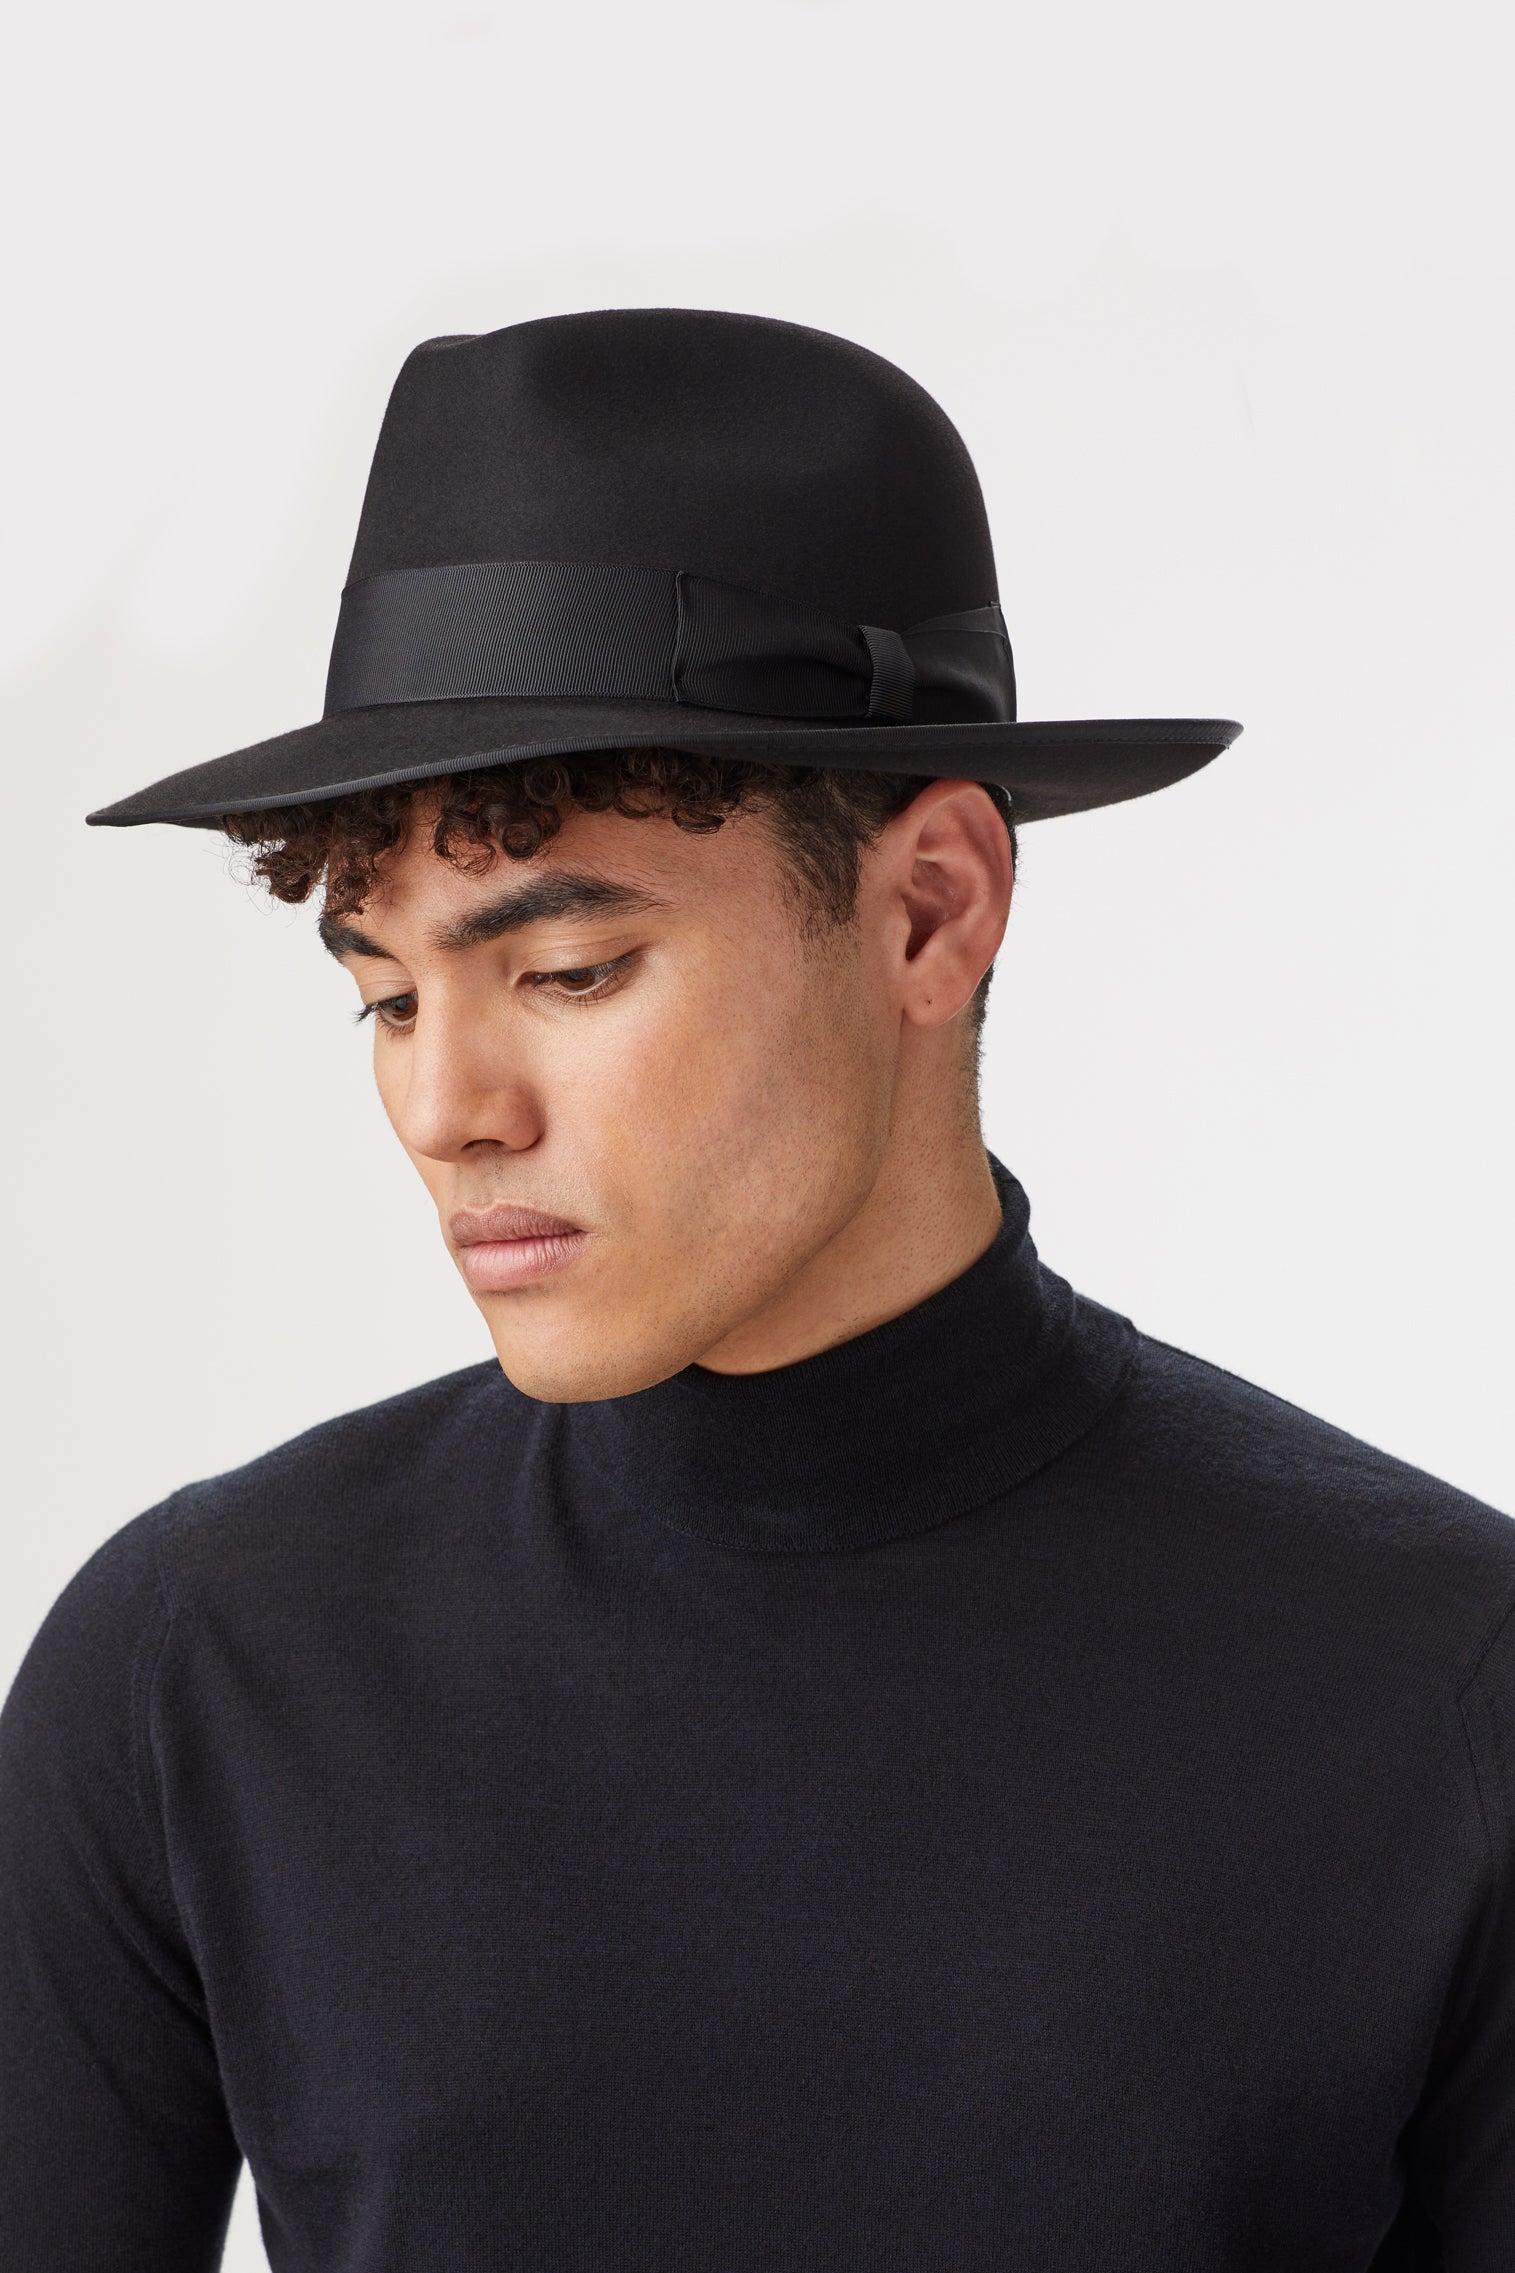 St James's Black Fedora - Hats for Round Face Shapes - Lock & Co. Hatters London UK